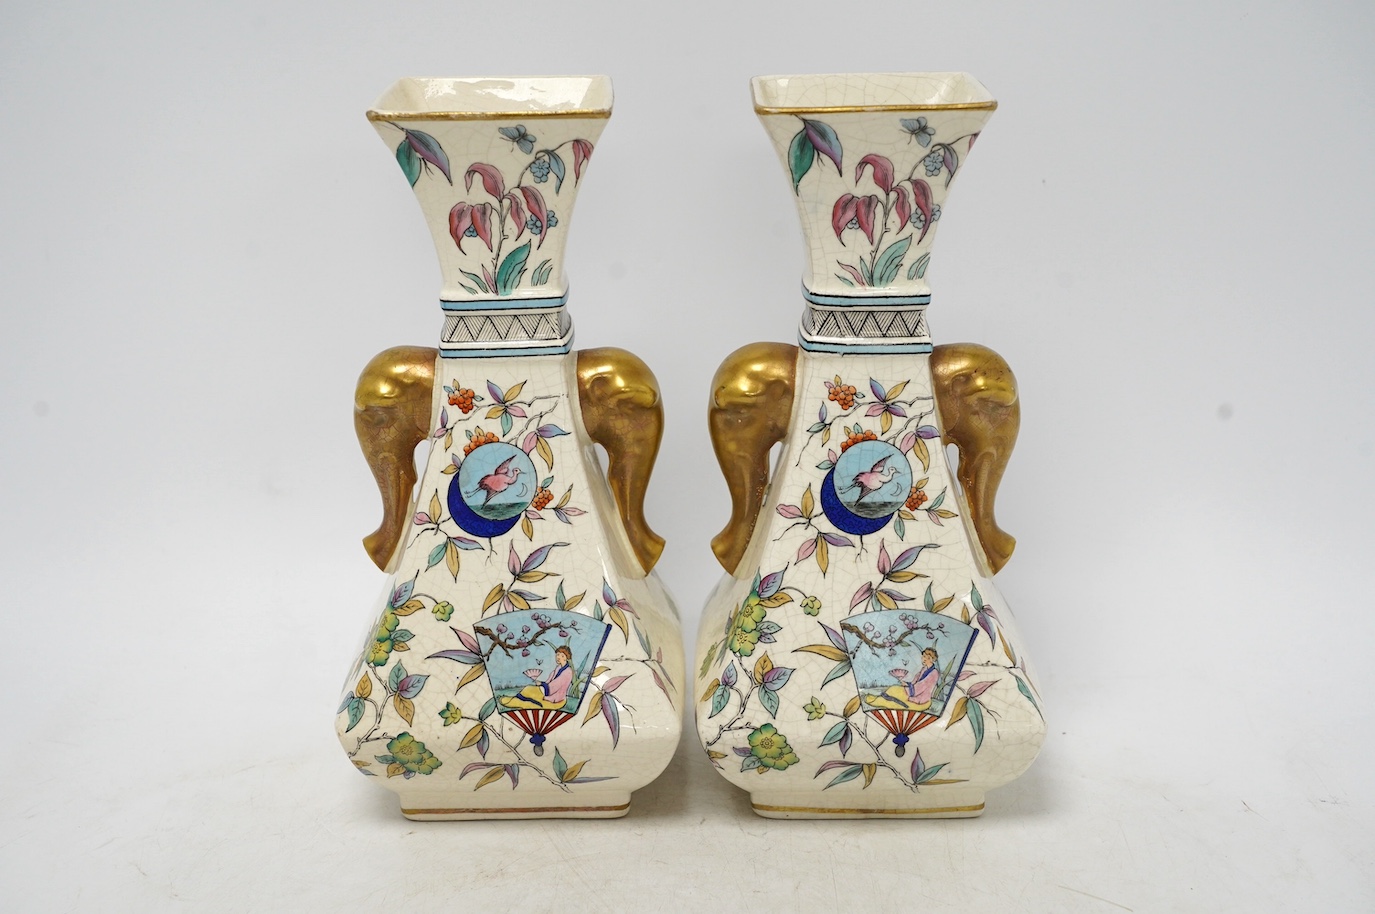 A pair of Christopher Dresser Old Hall crackleware Japanese inspired vases with gilt decorated elephant handles, 24cm high. Condition - good